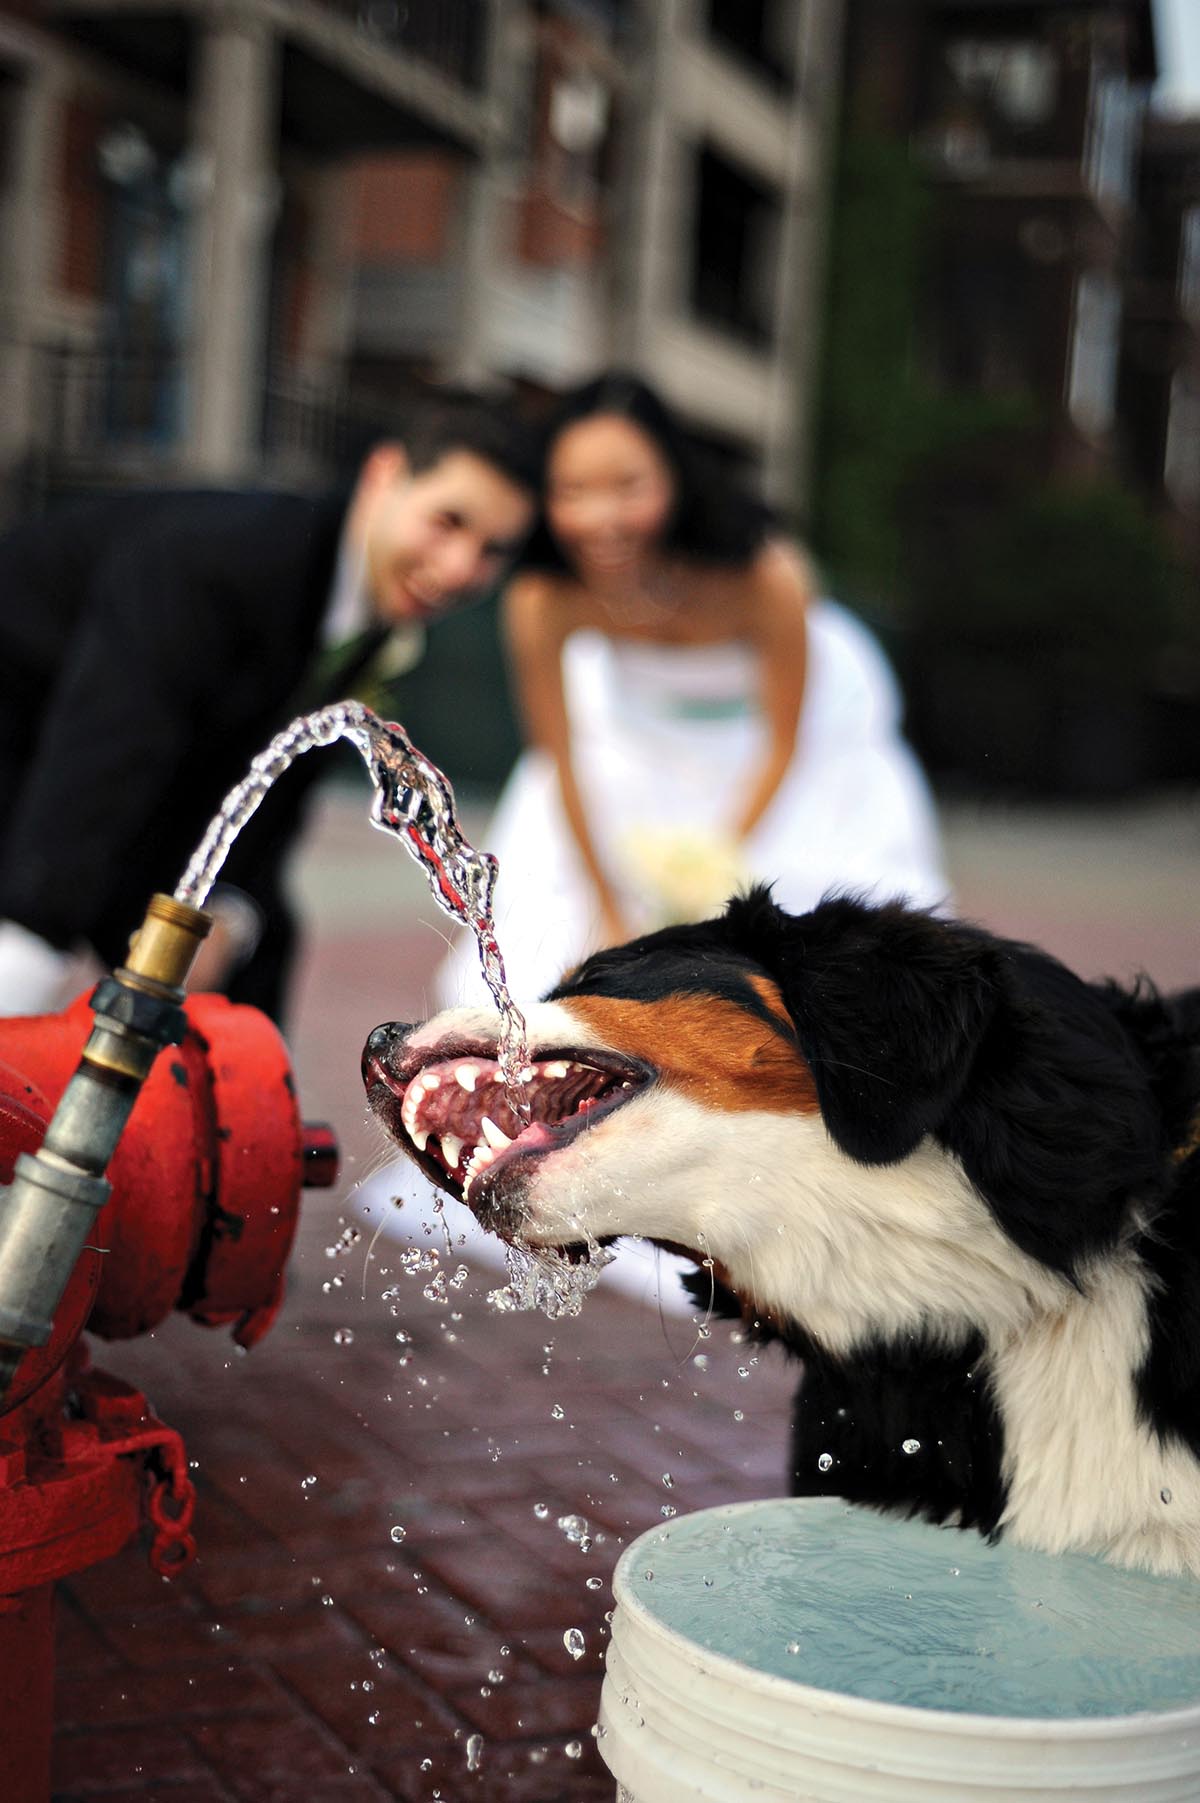 A black, brown, and white dog drinks from a spout as a wedding couple laughs out of focus in the background.